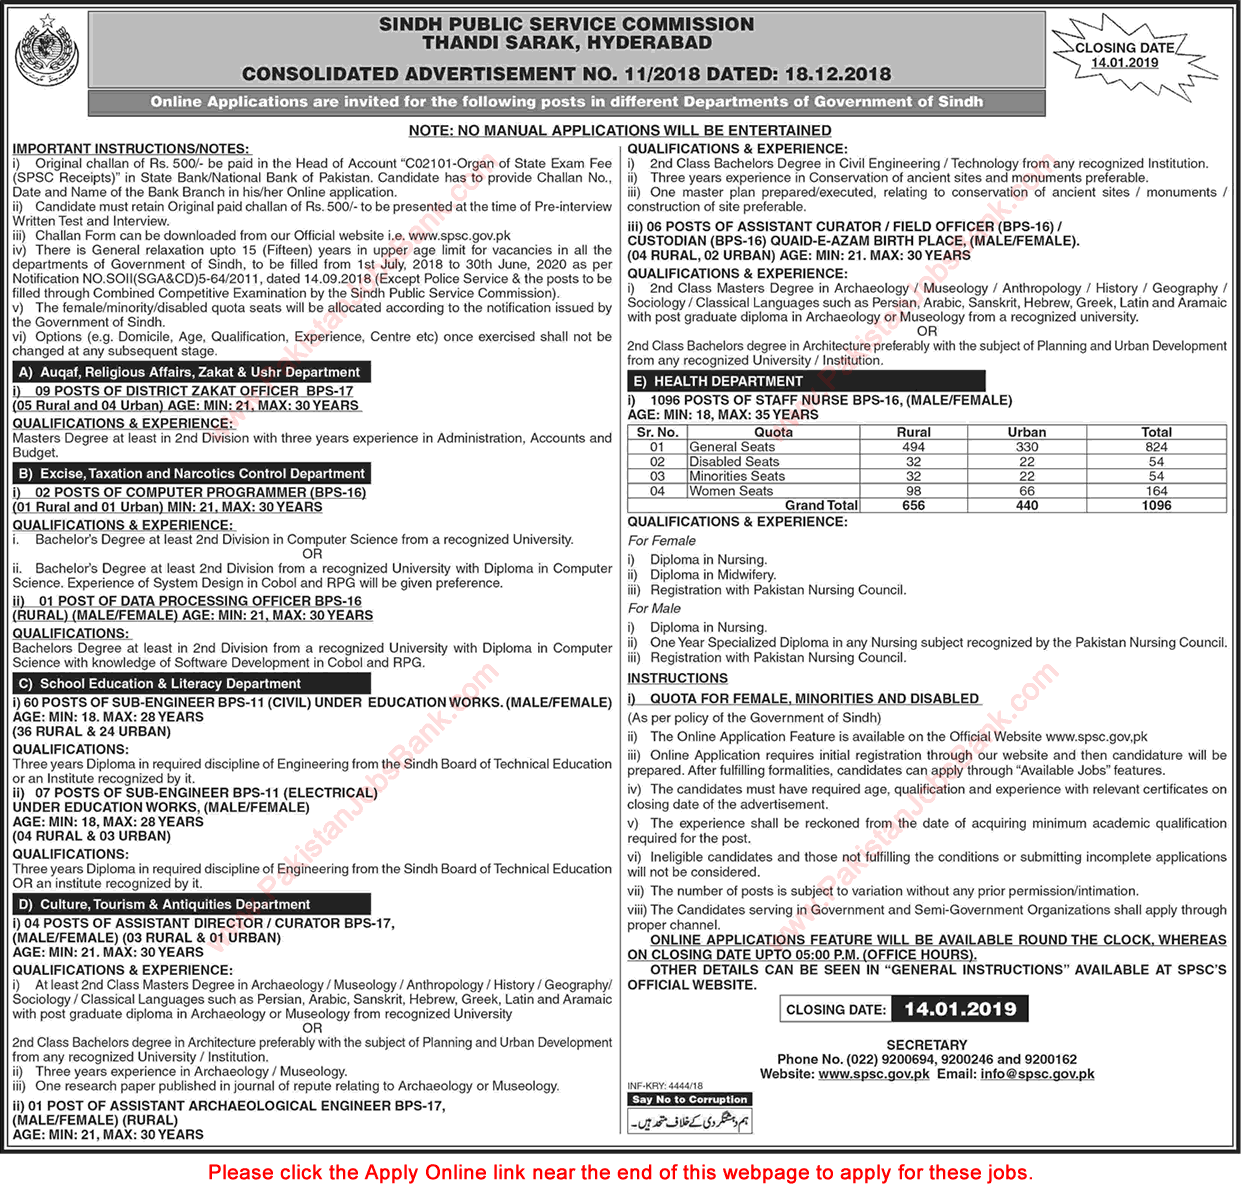 SPSC Jobs December 2018 Apply Online Consolidated Advertisement No 11/2018 Latest